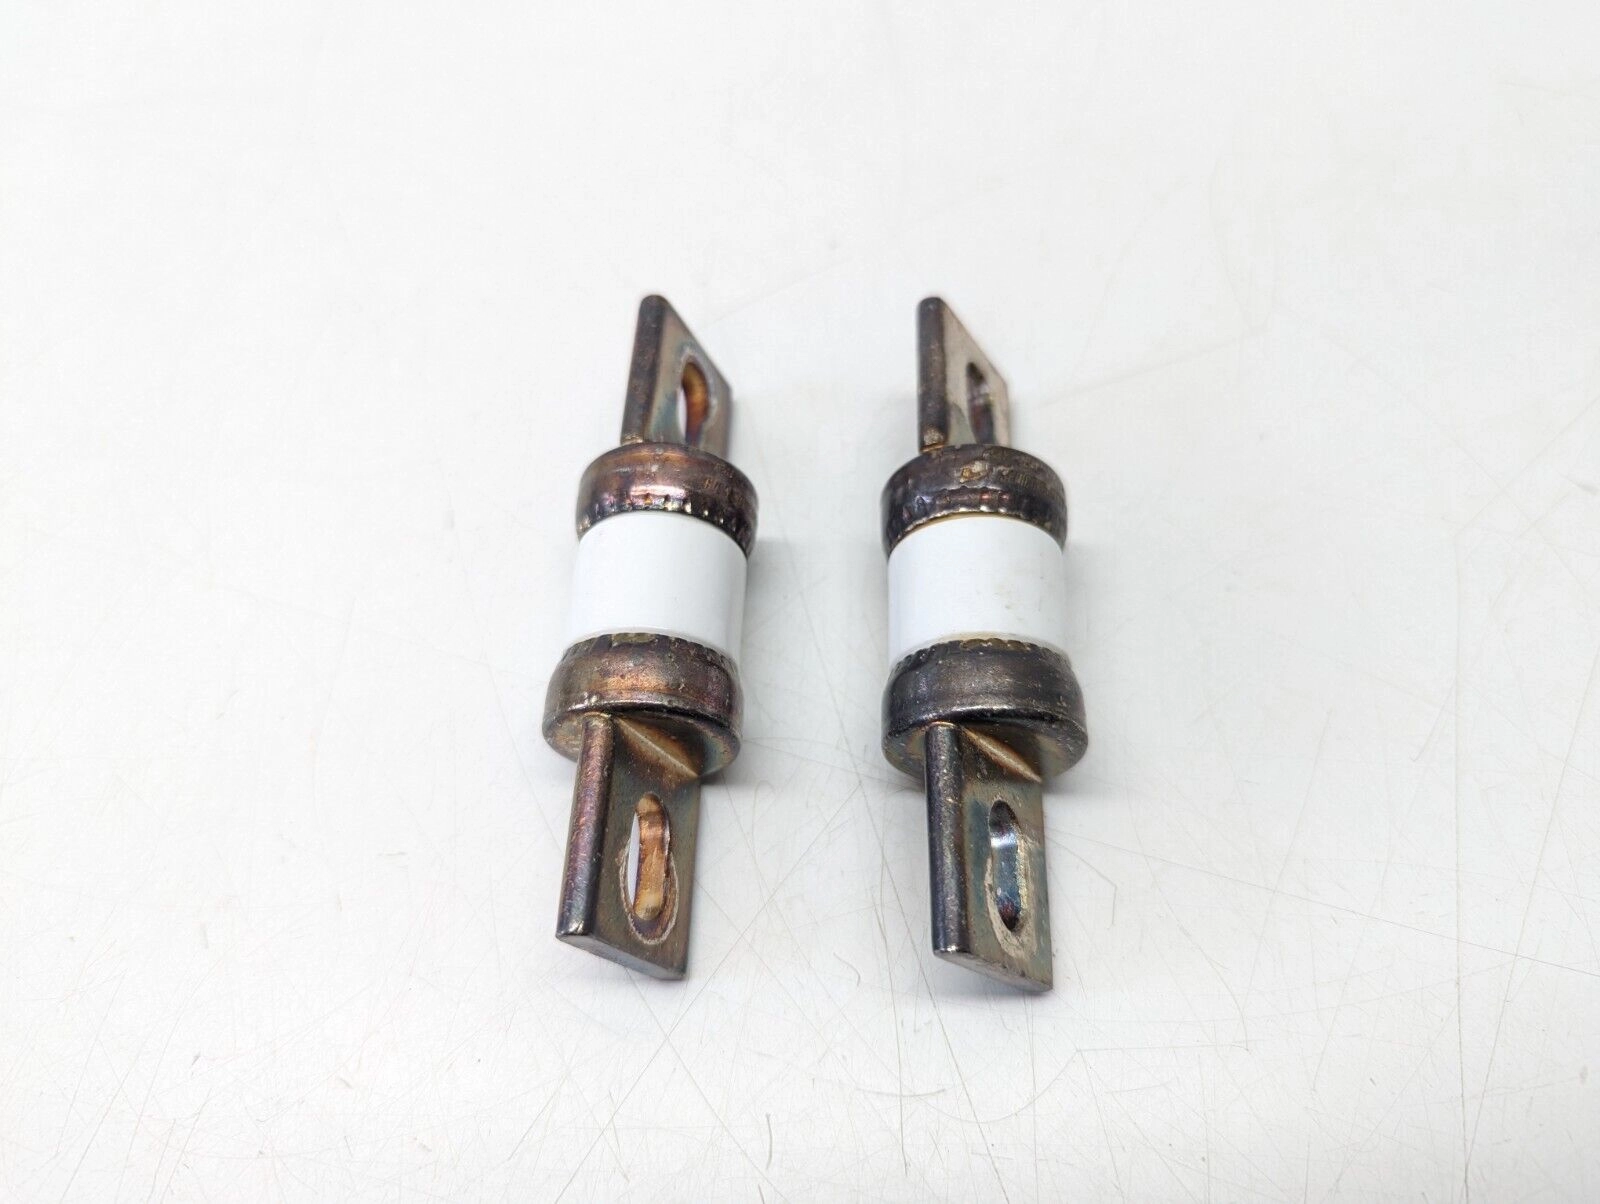 Pair of 2 Bussmann Buss FWH-150 Semiconductor Fuse